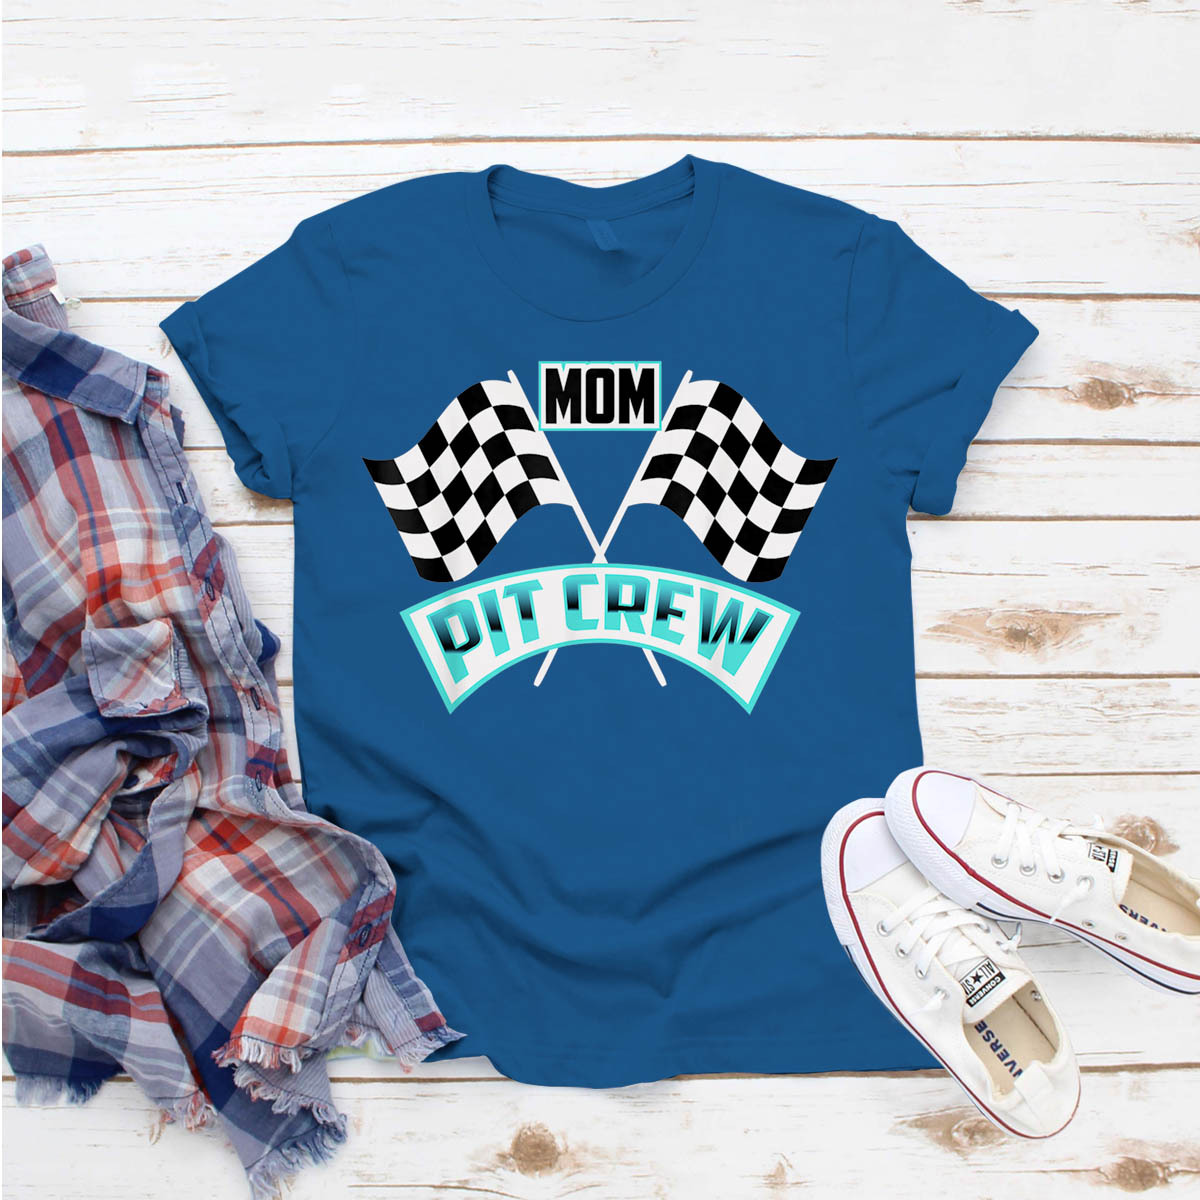 Mom Pit Crew Mother Car Racing Lovers T-Shirt Ideas Birthday Gift ...